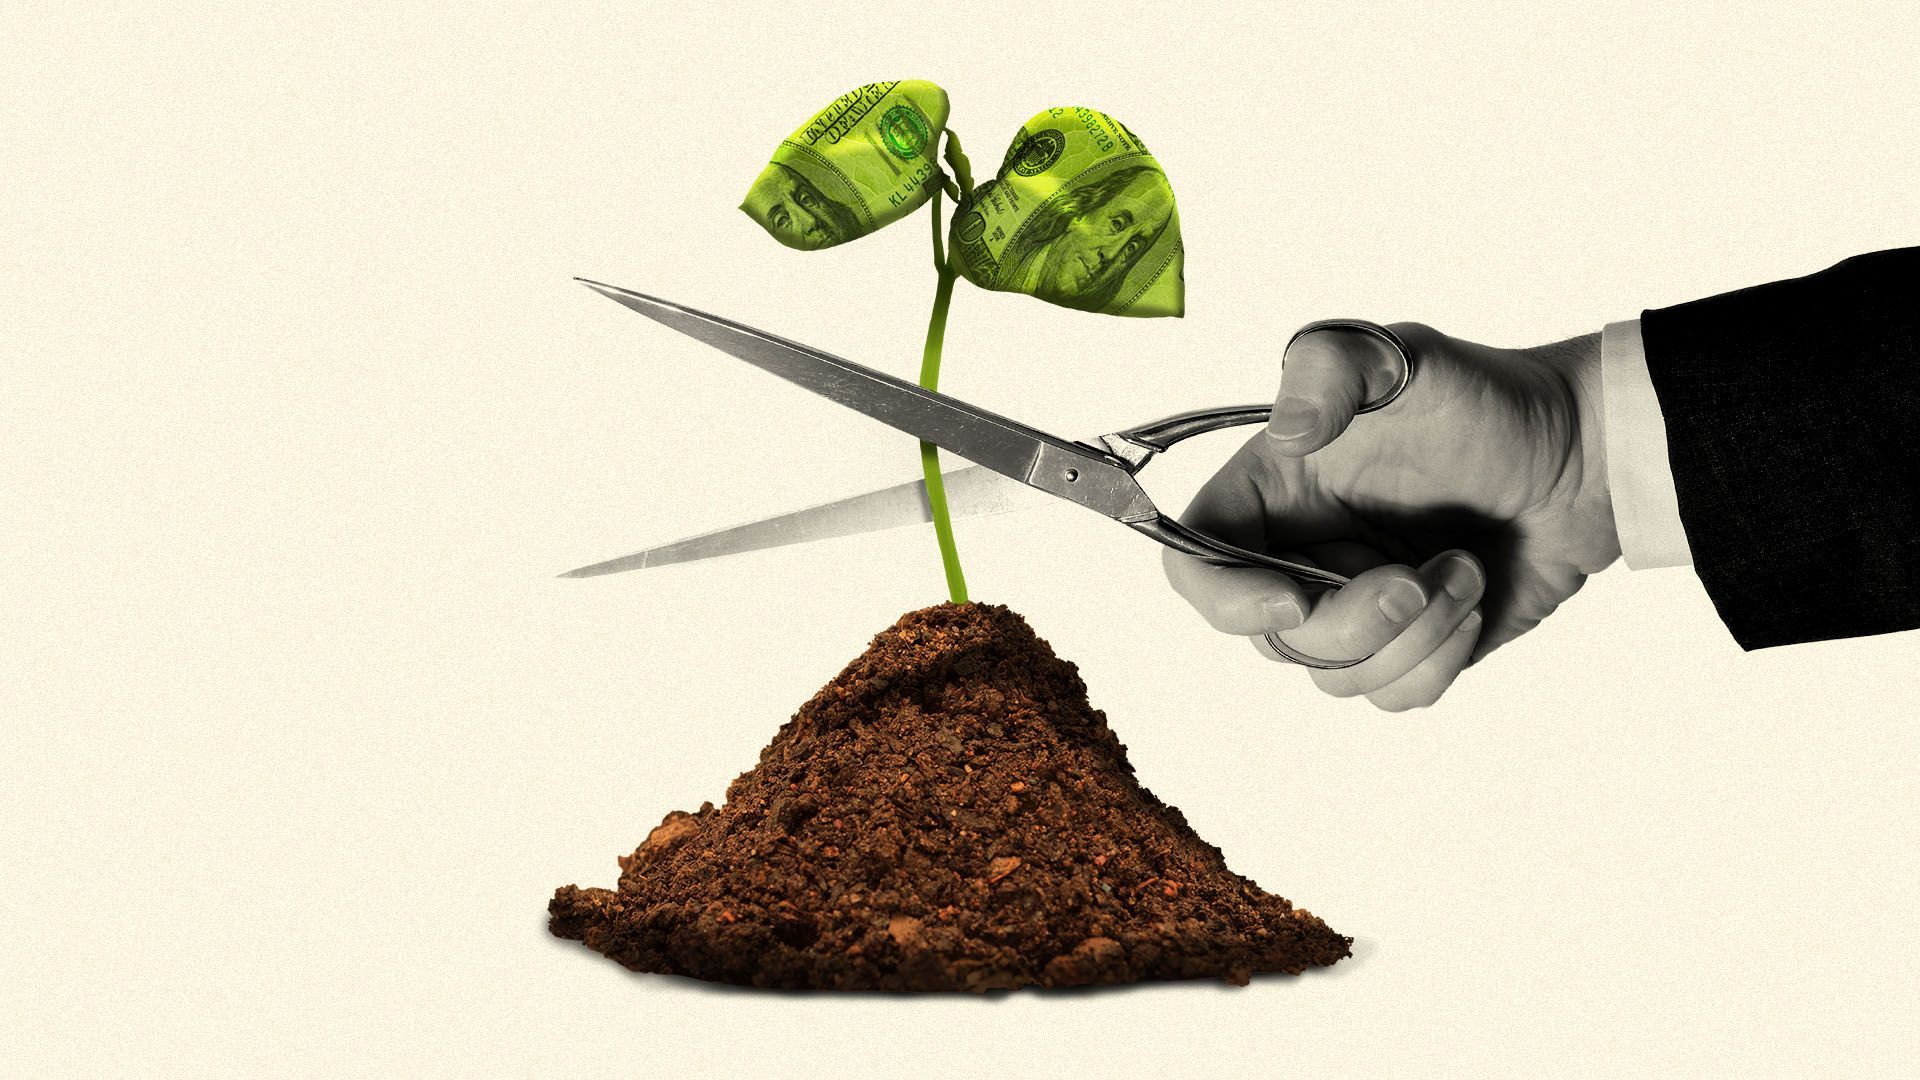 Illustration of a hand with scissors about to cut a small plant with 100 dollar bill leaves